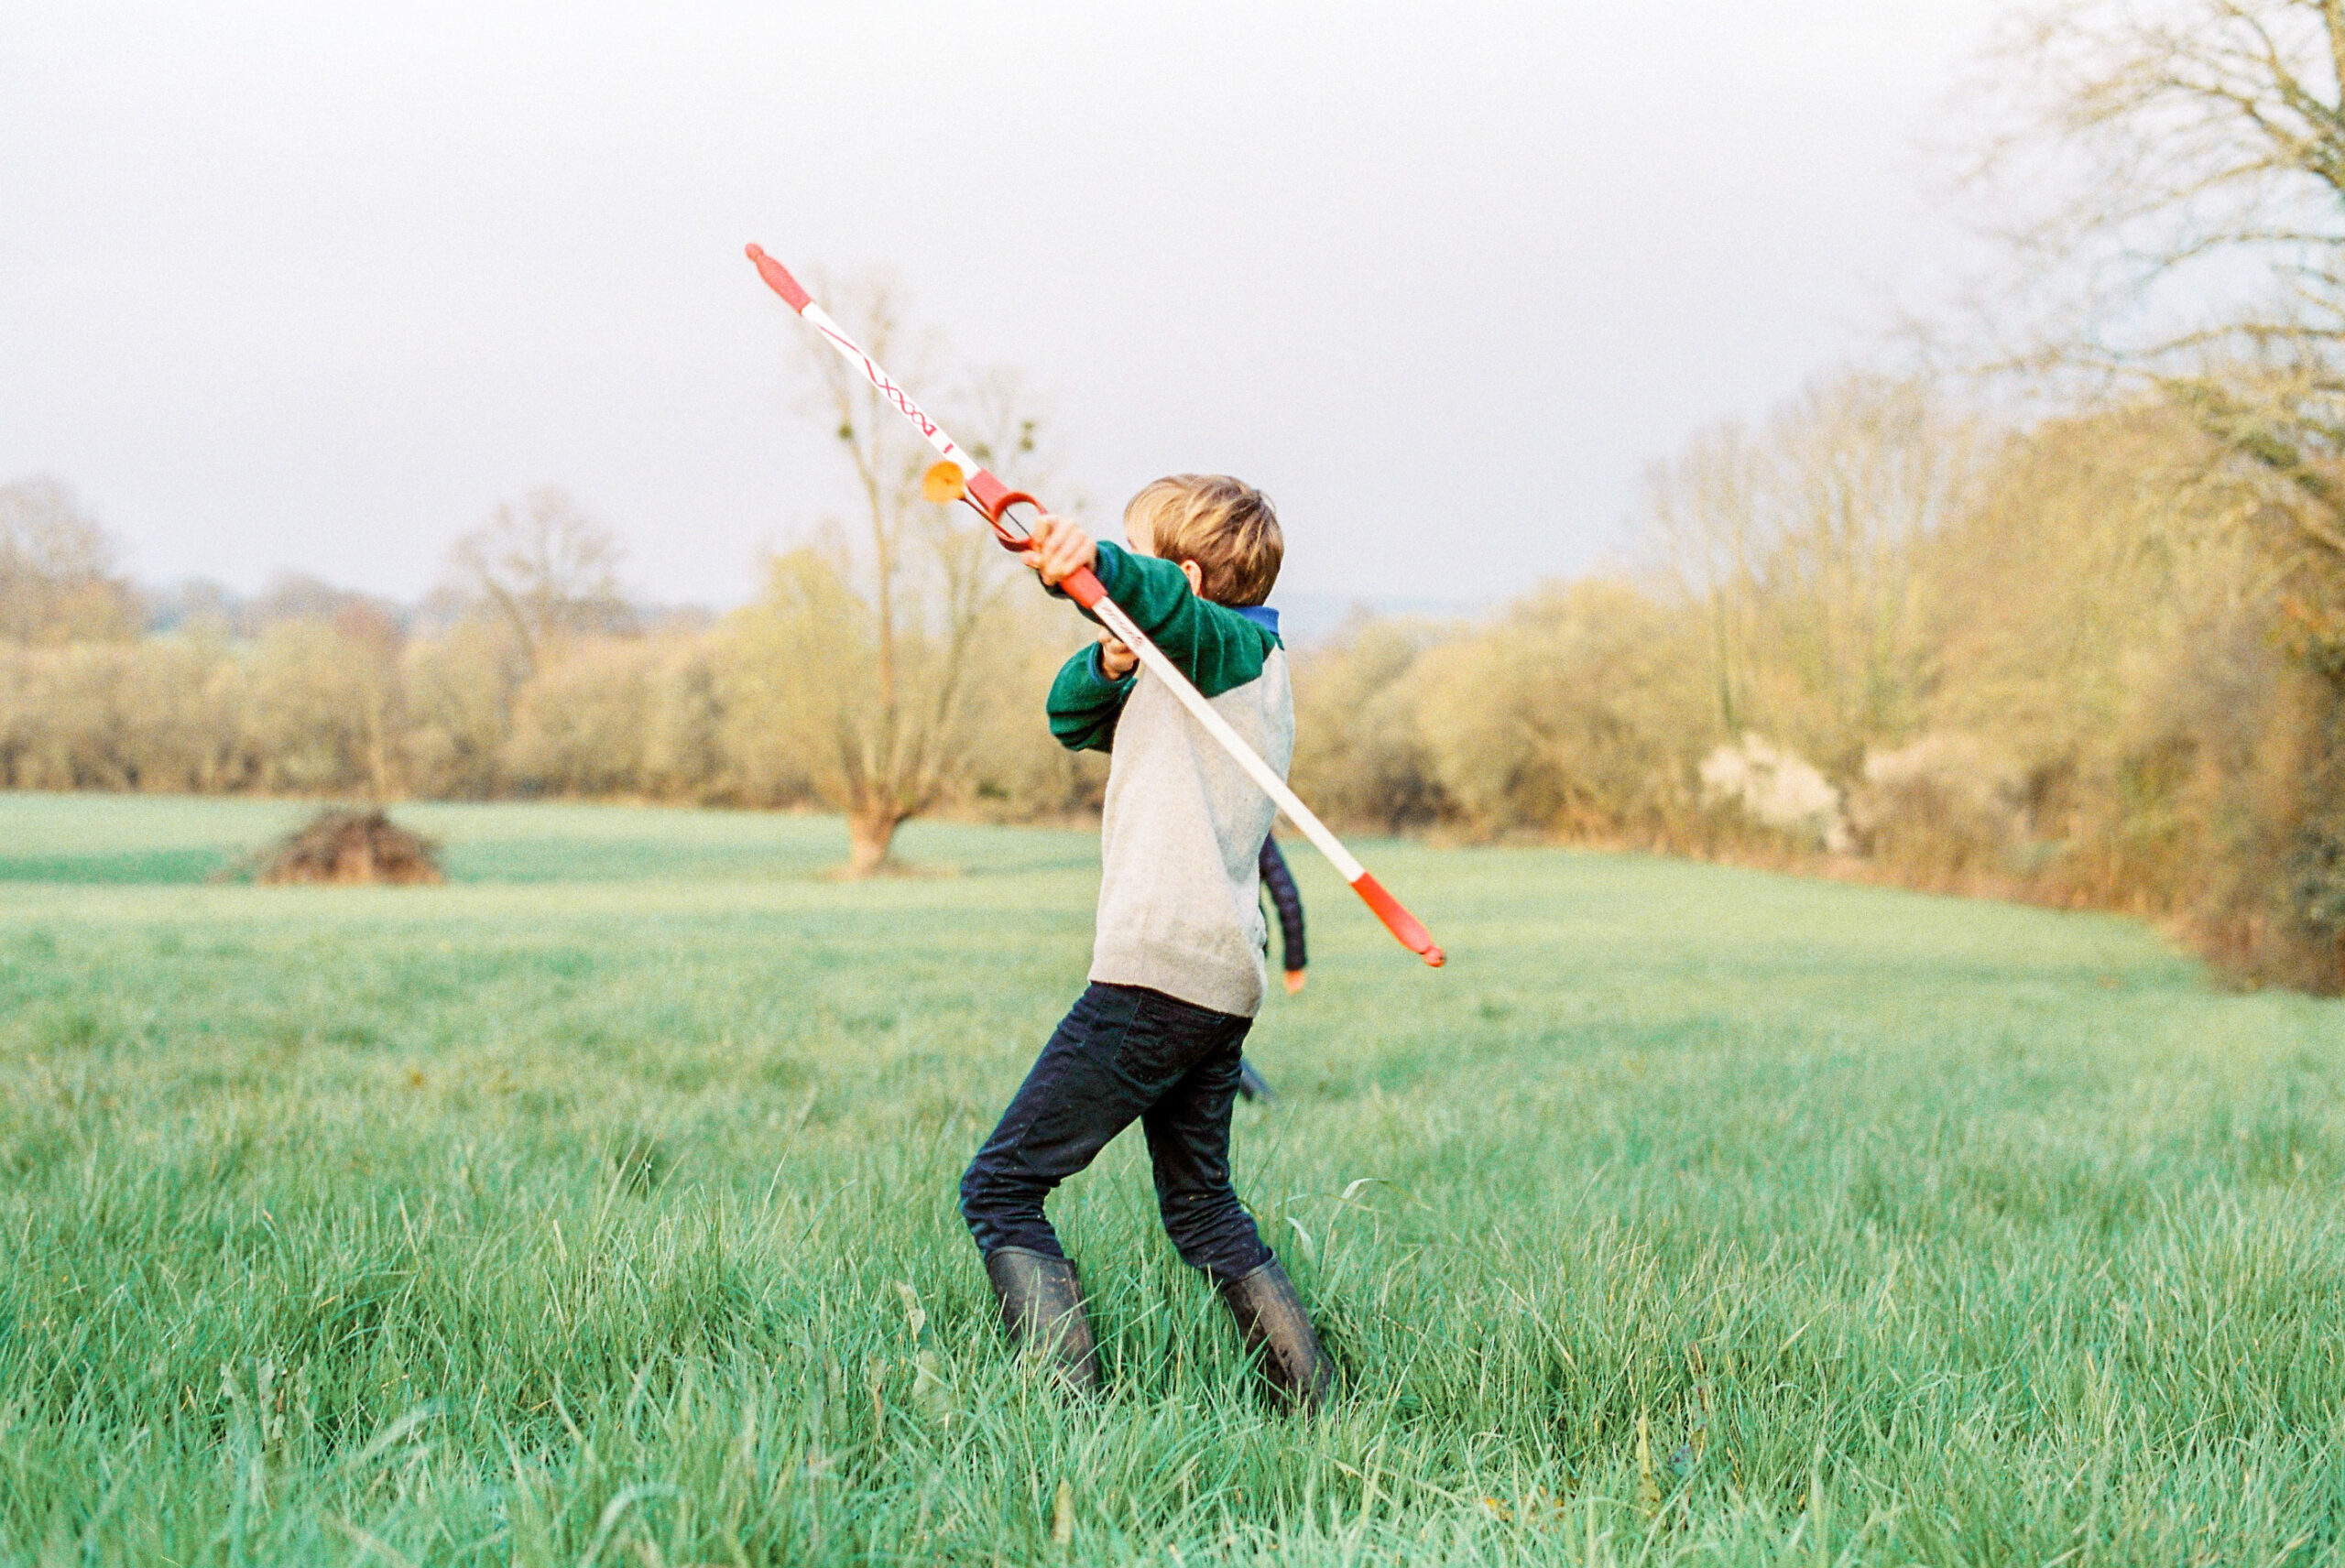 boy with rubber bow and arrow in a field decisive moment